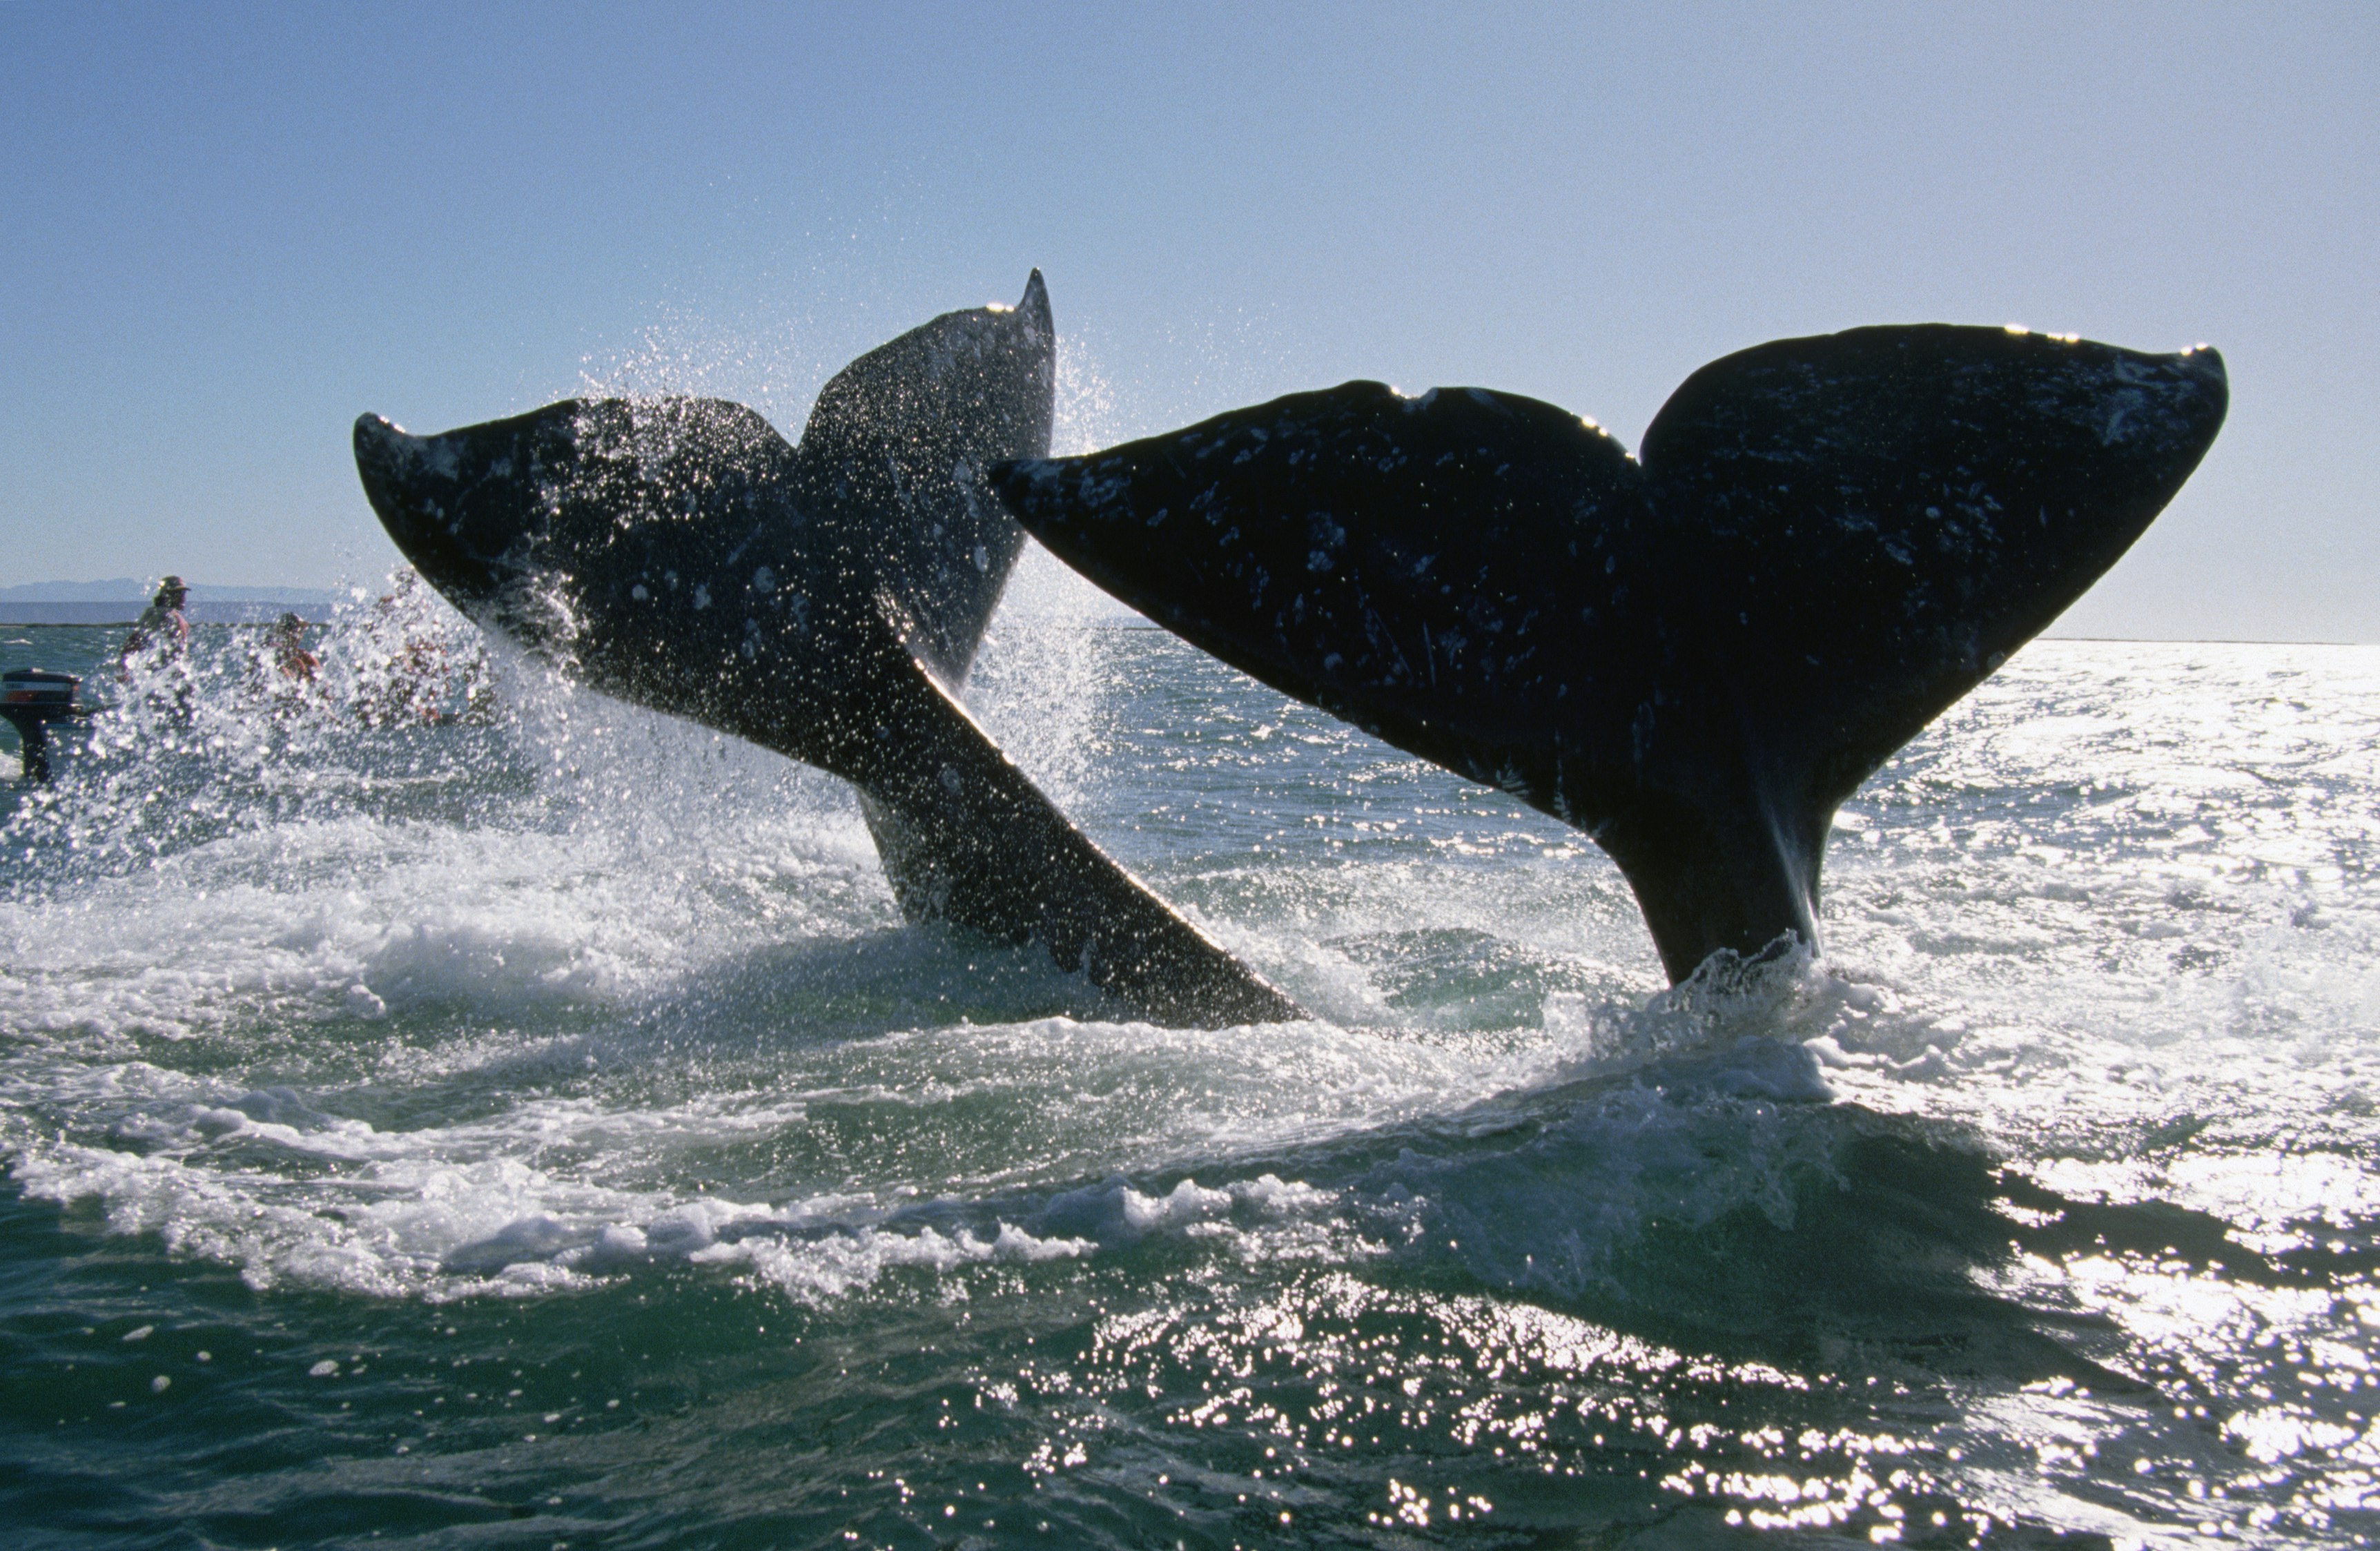 The flukes of mating gray whales splash near a boatload of tourists in Baja California, Mexico.